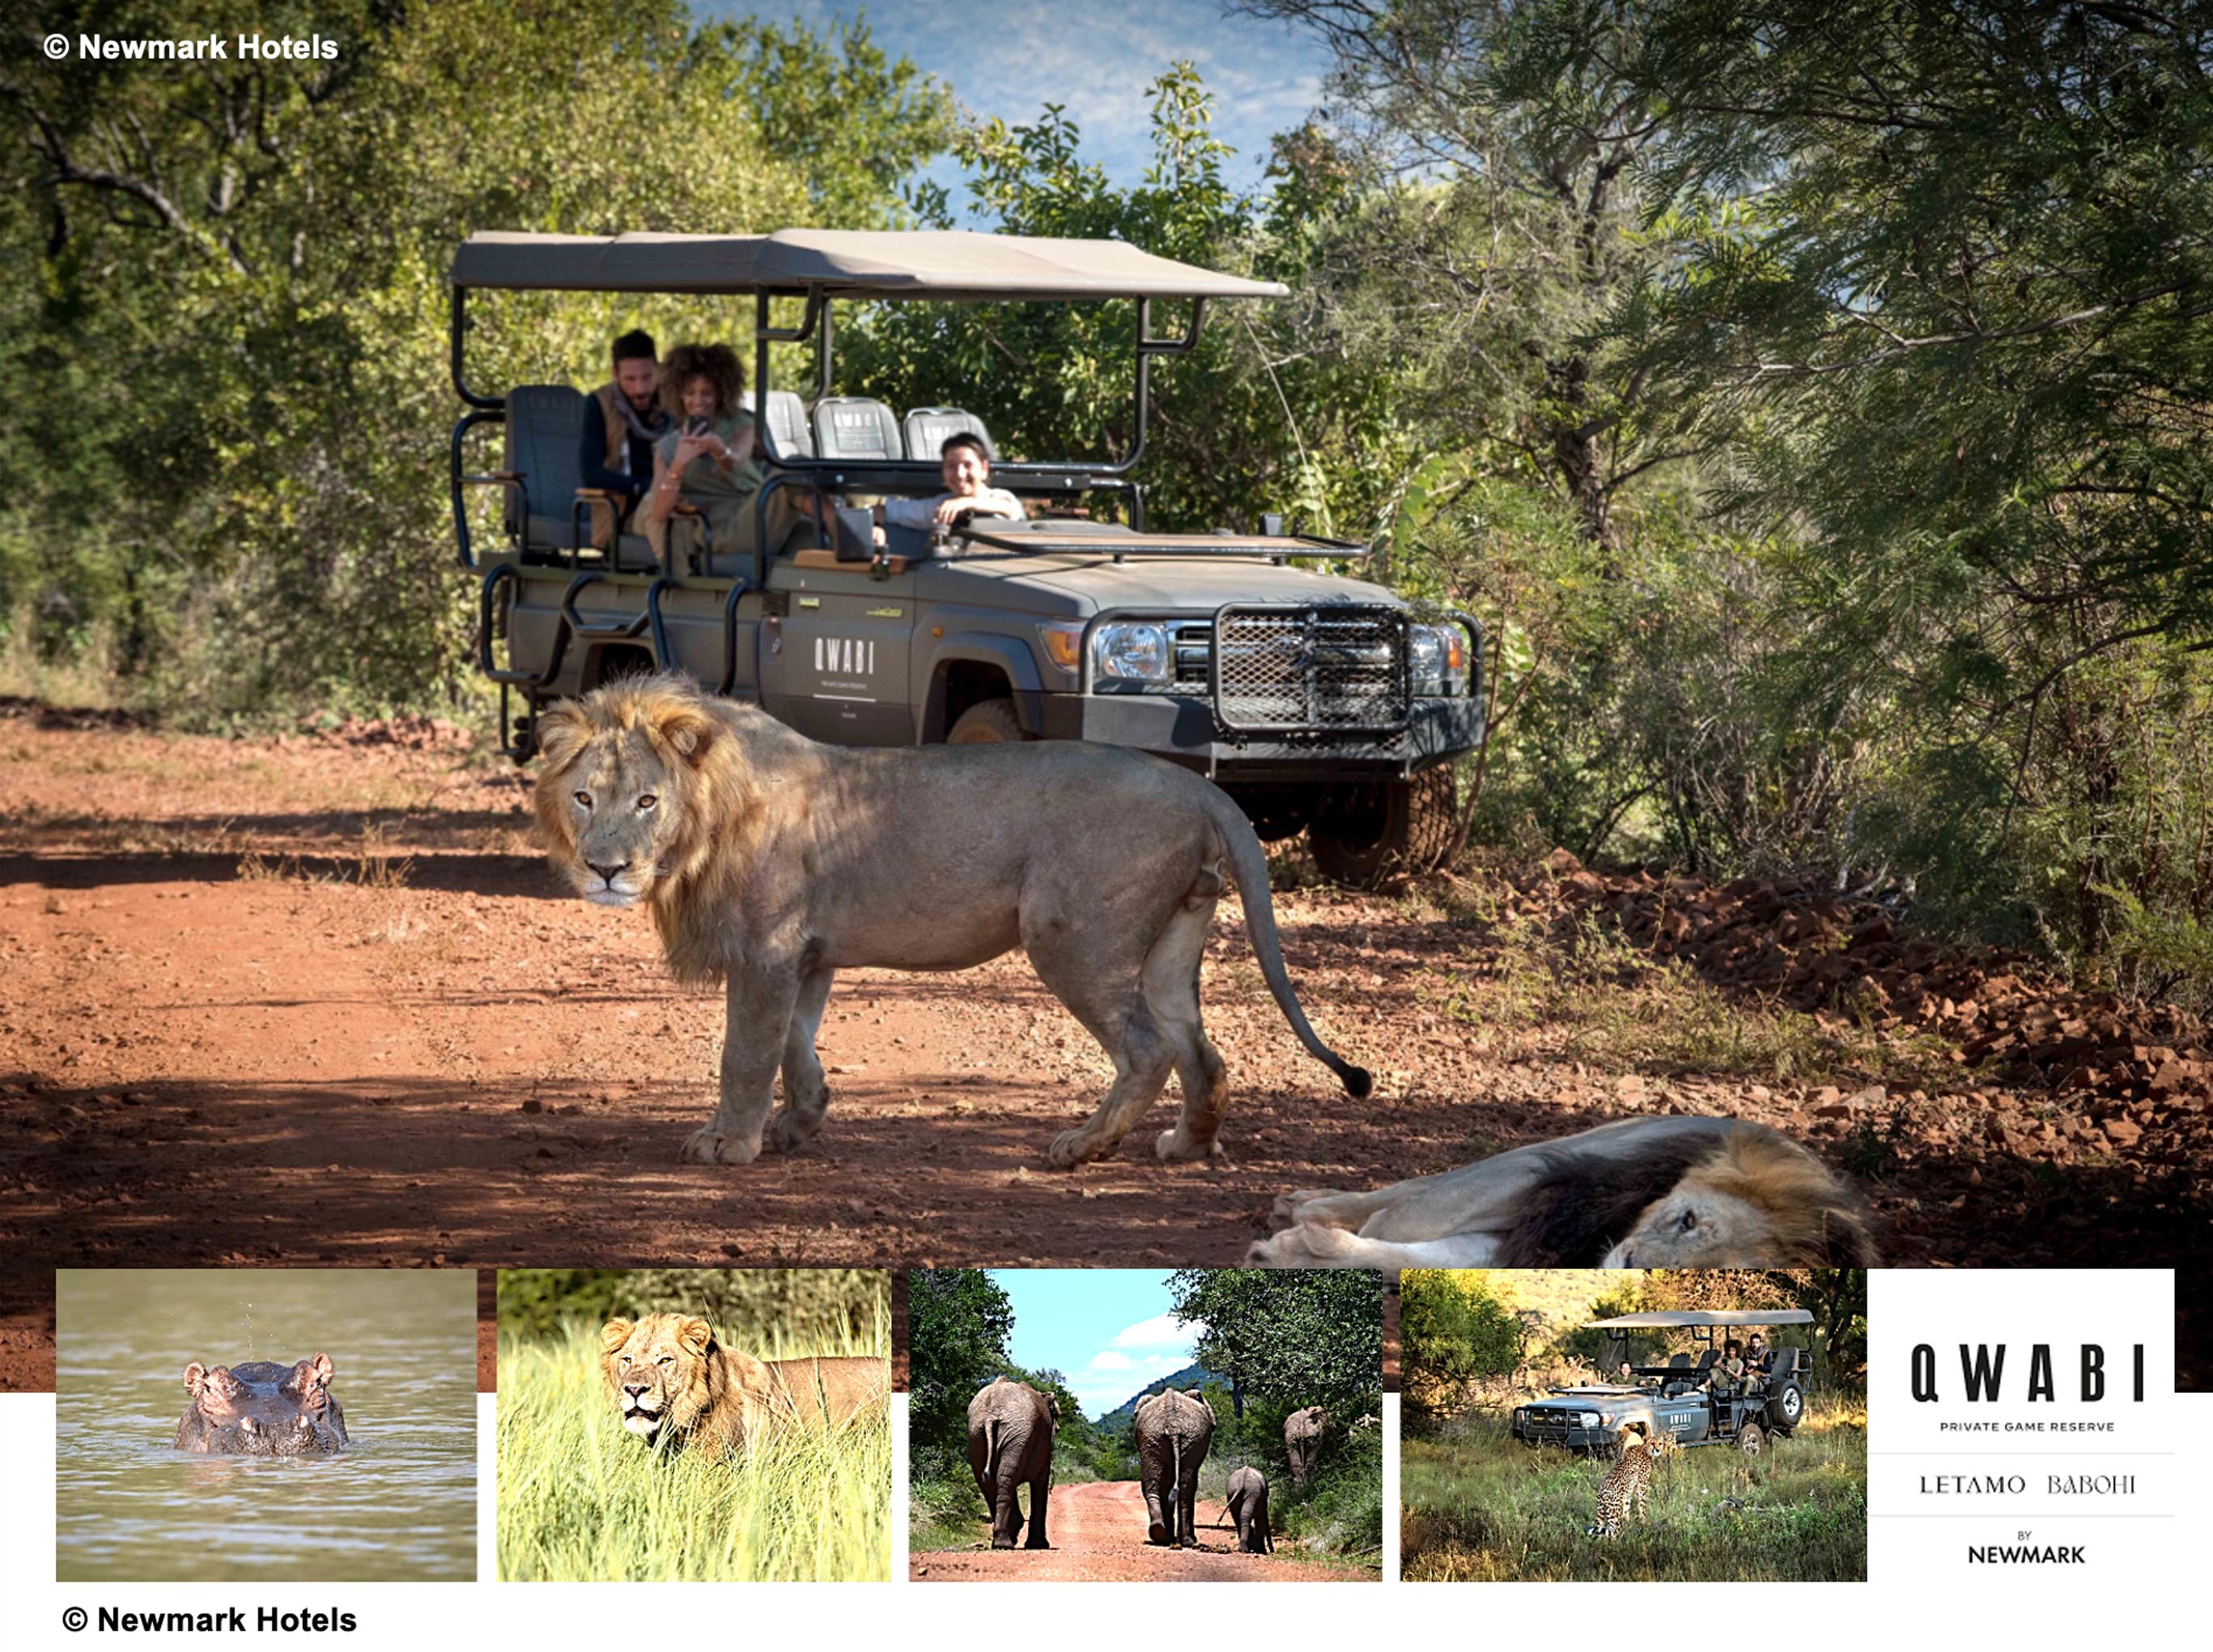 KENWOOD DMR upgrade provides operations critical radio communications at the five-star Qwabi private game reserve